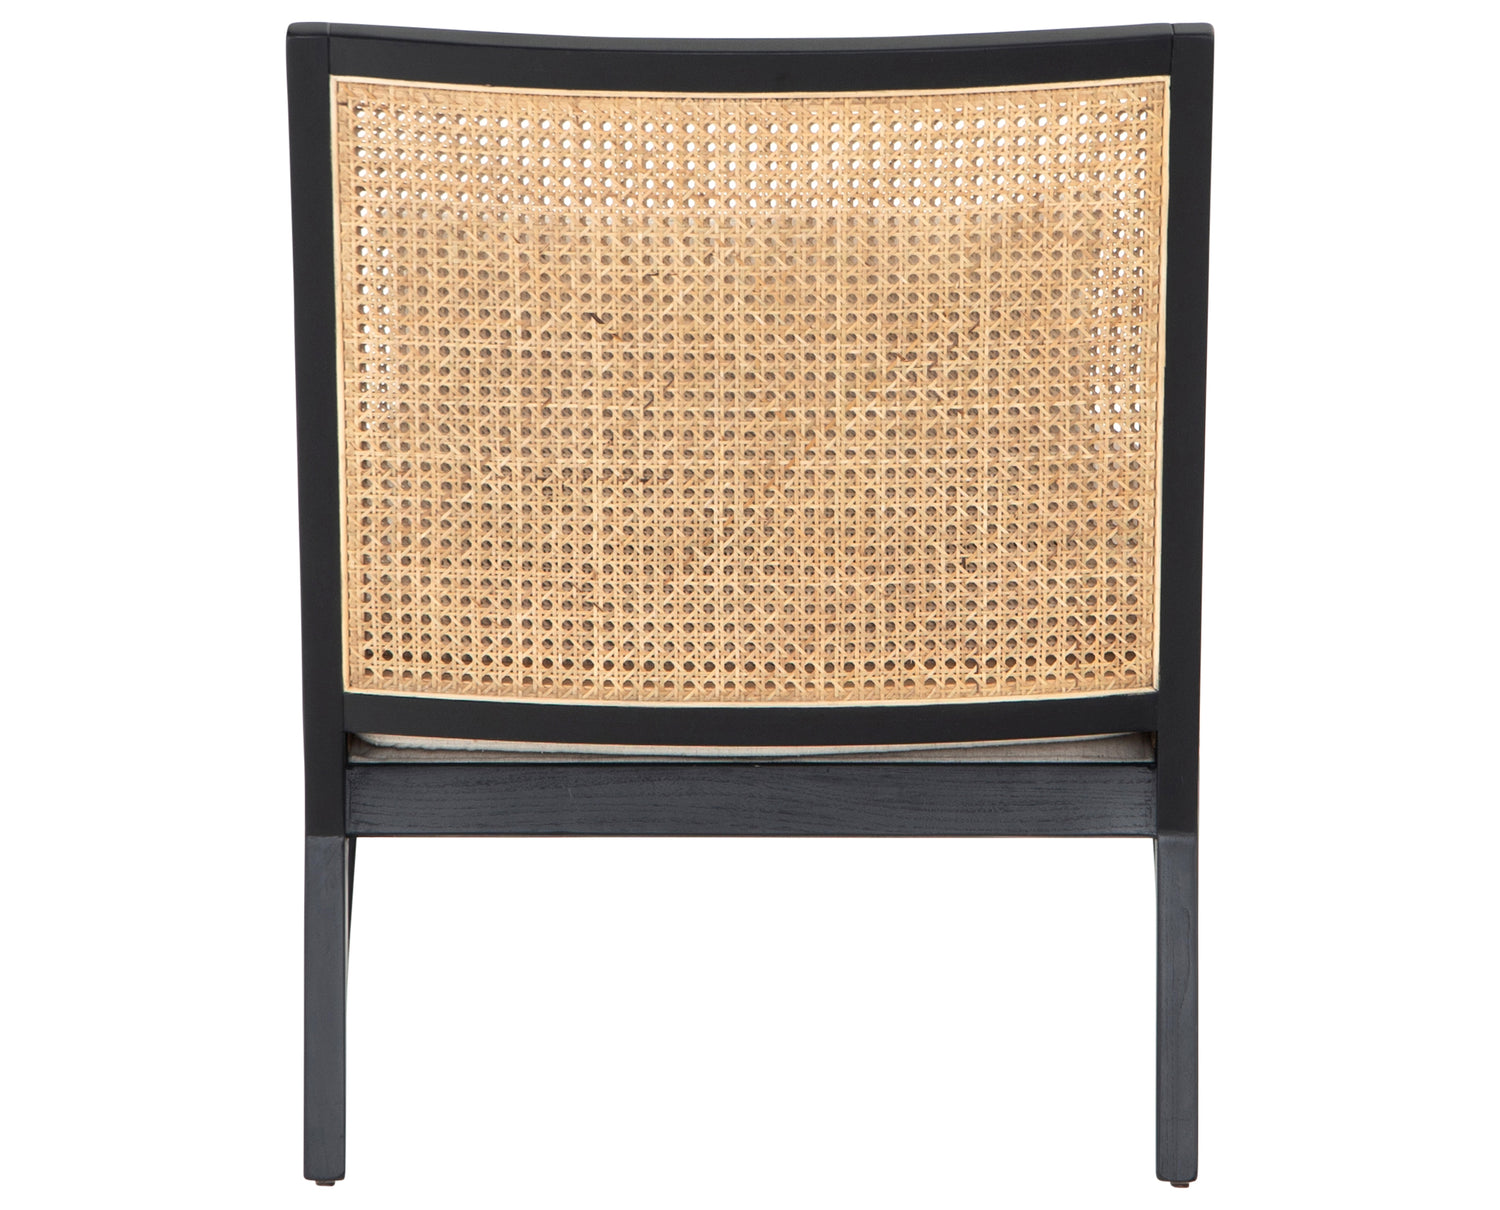 Savile Flax Fabric & Natural Cane with Brushed Ebony Parawood | Antonia Cane Chair | Valley Ridge Furniture